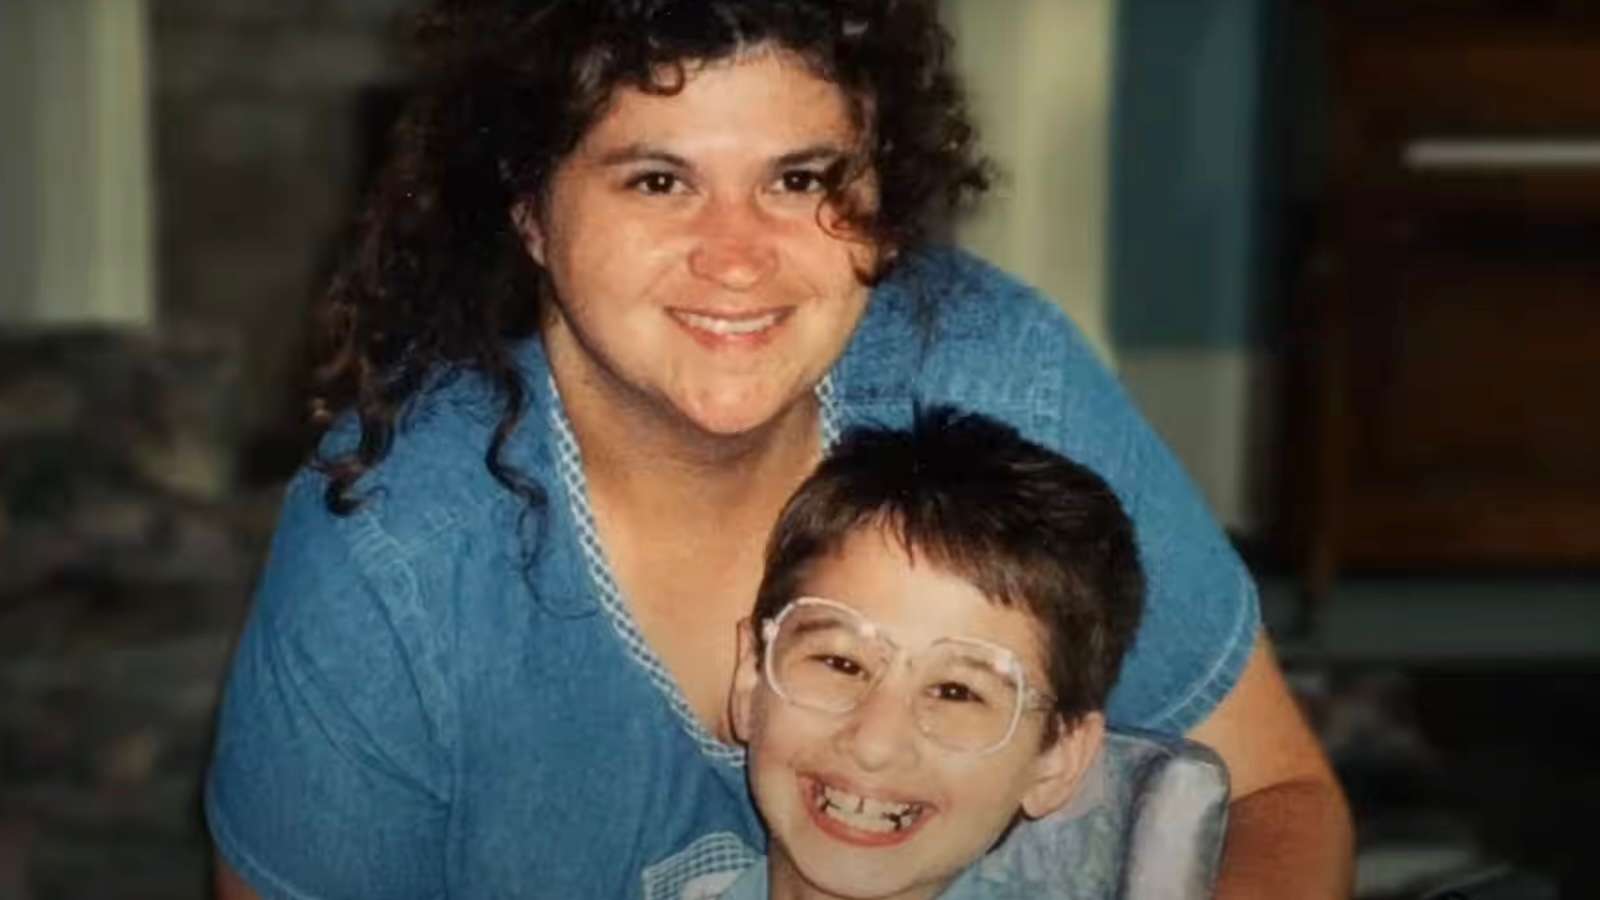 Photo of Gypsy Rose and Dee Blanchard from The Prison Confessions of Gypsy Rose Blanchard